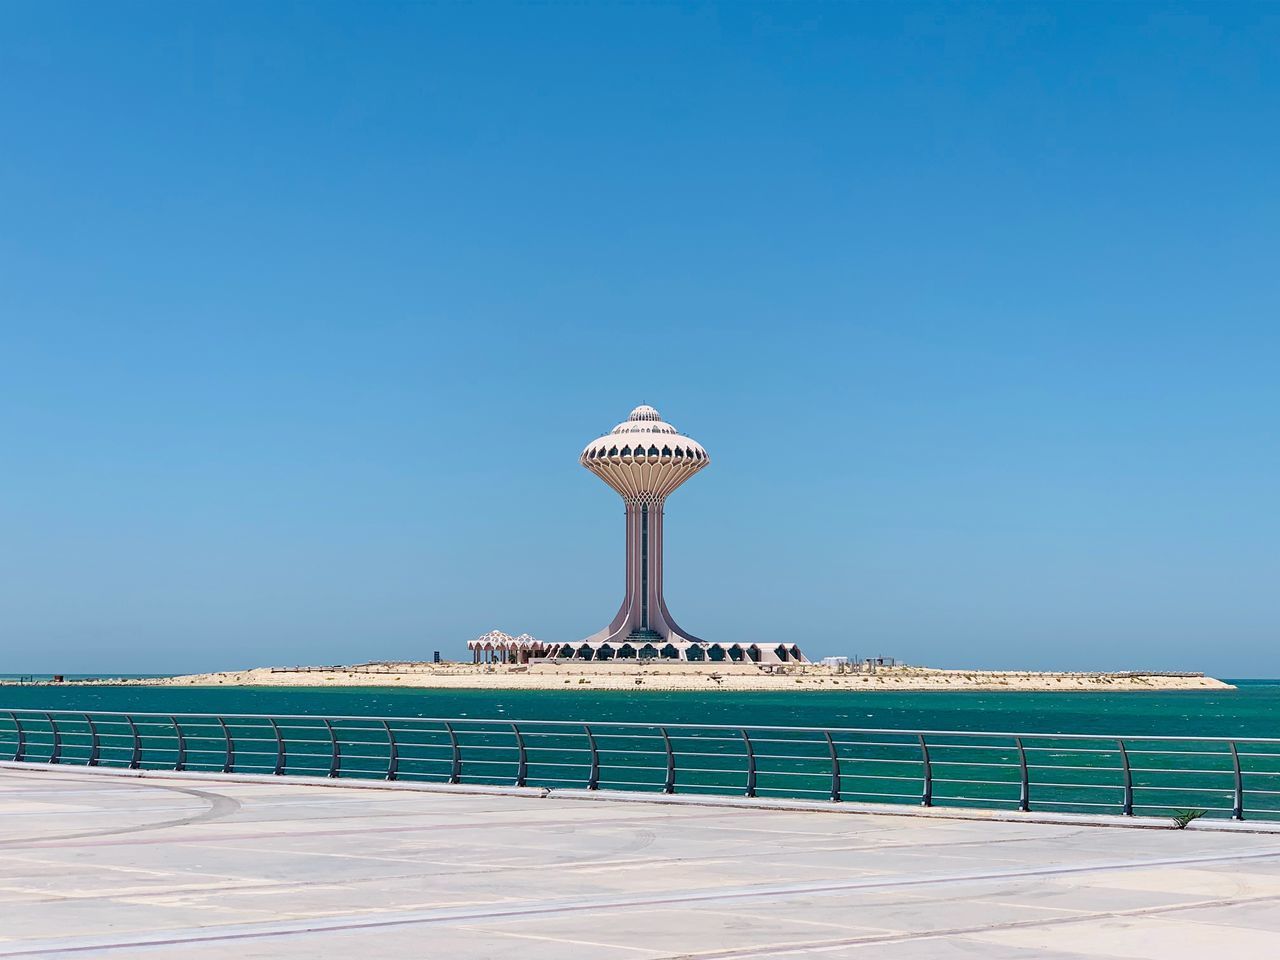 sky, blue, architecture, built structure, sea, water, clear sky, copy space, nature, no people, railing, building exterior, day, tourism, tower, travel, security, travel destinations, beach, outdoors, swimming pool